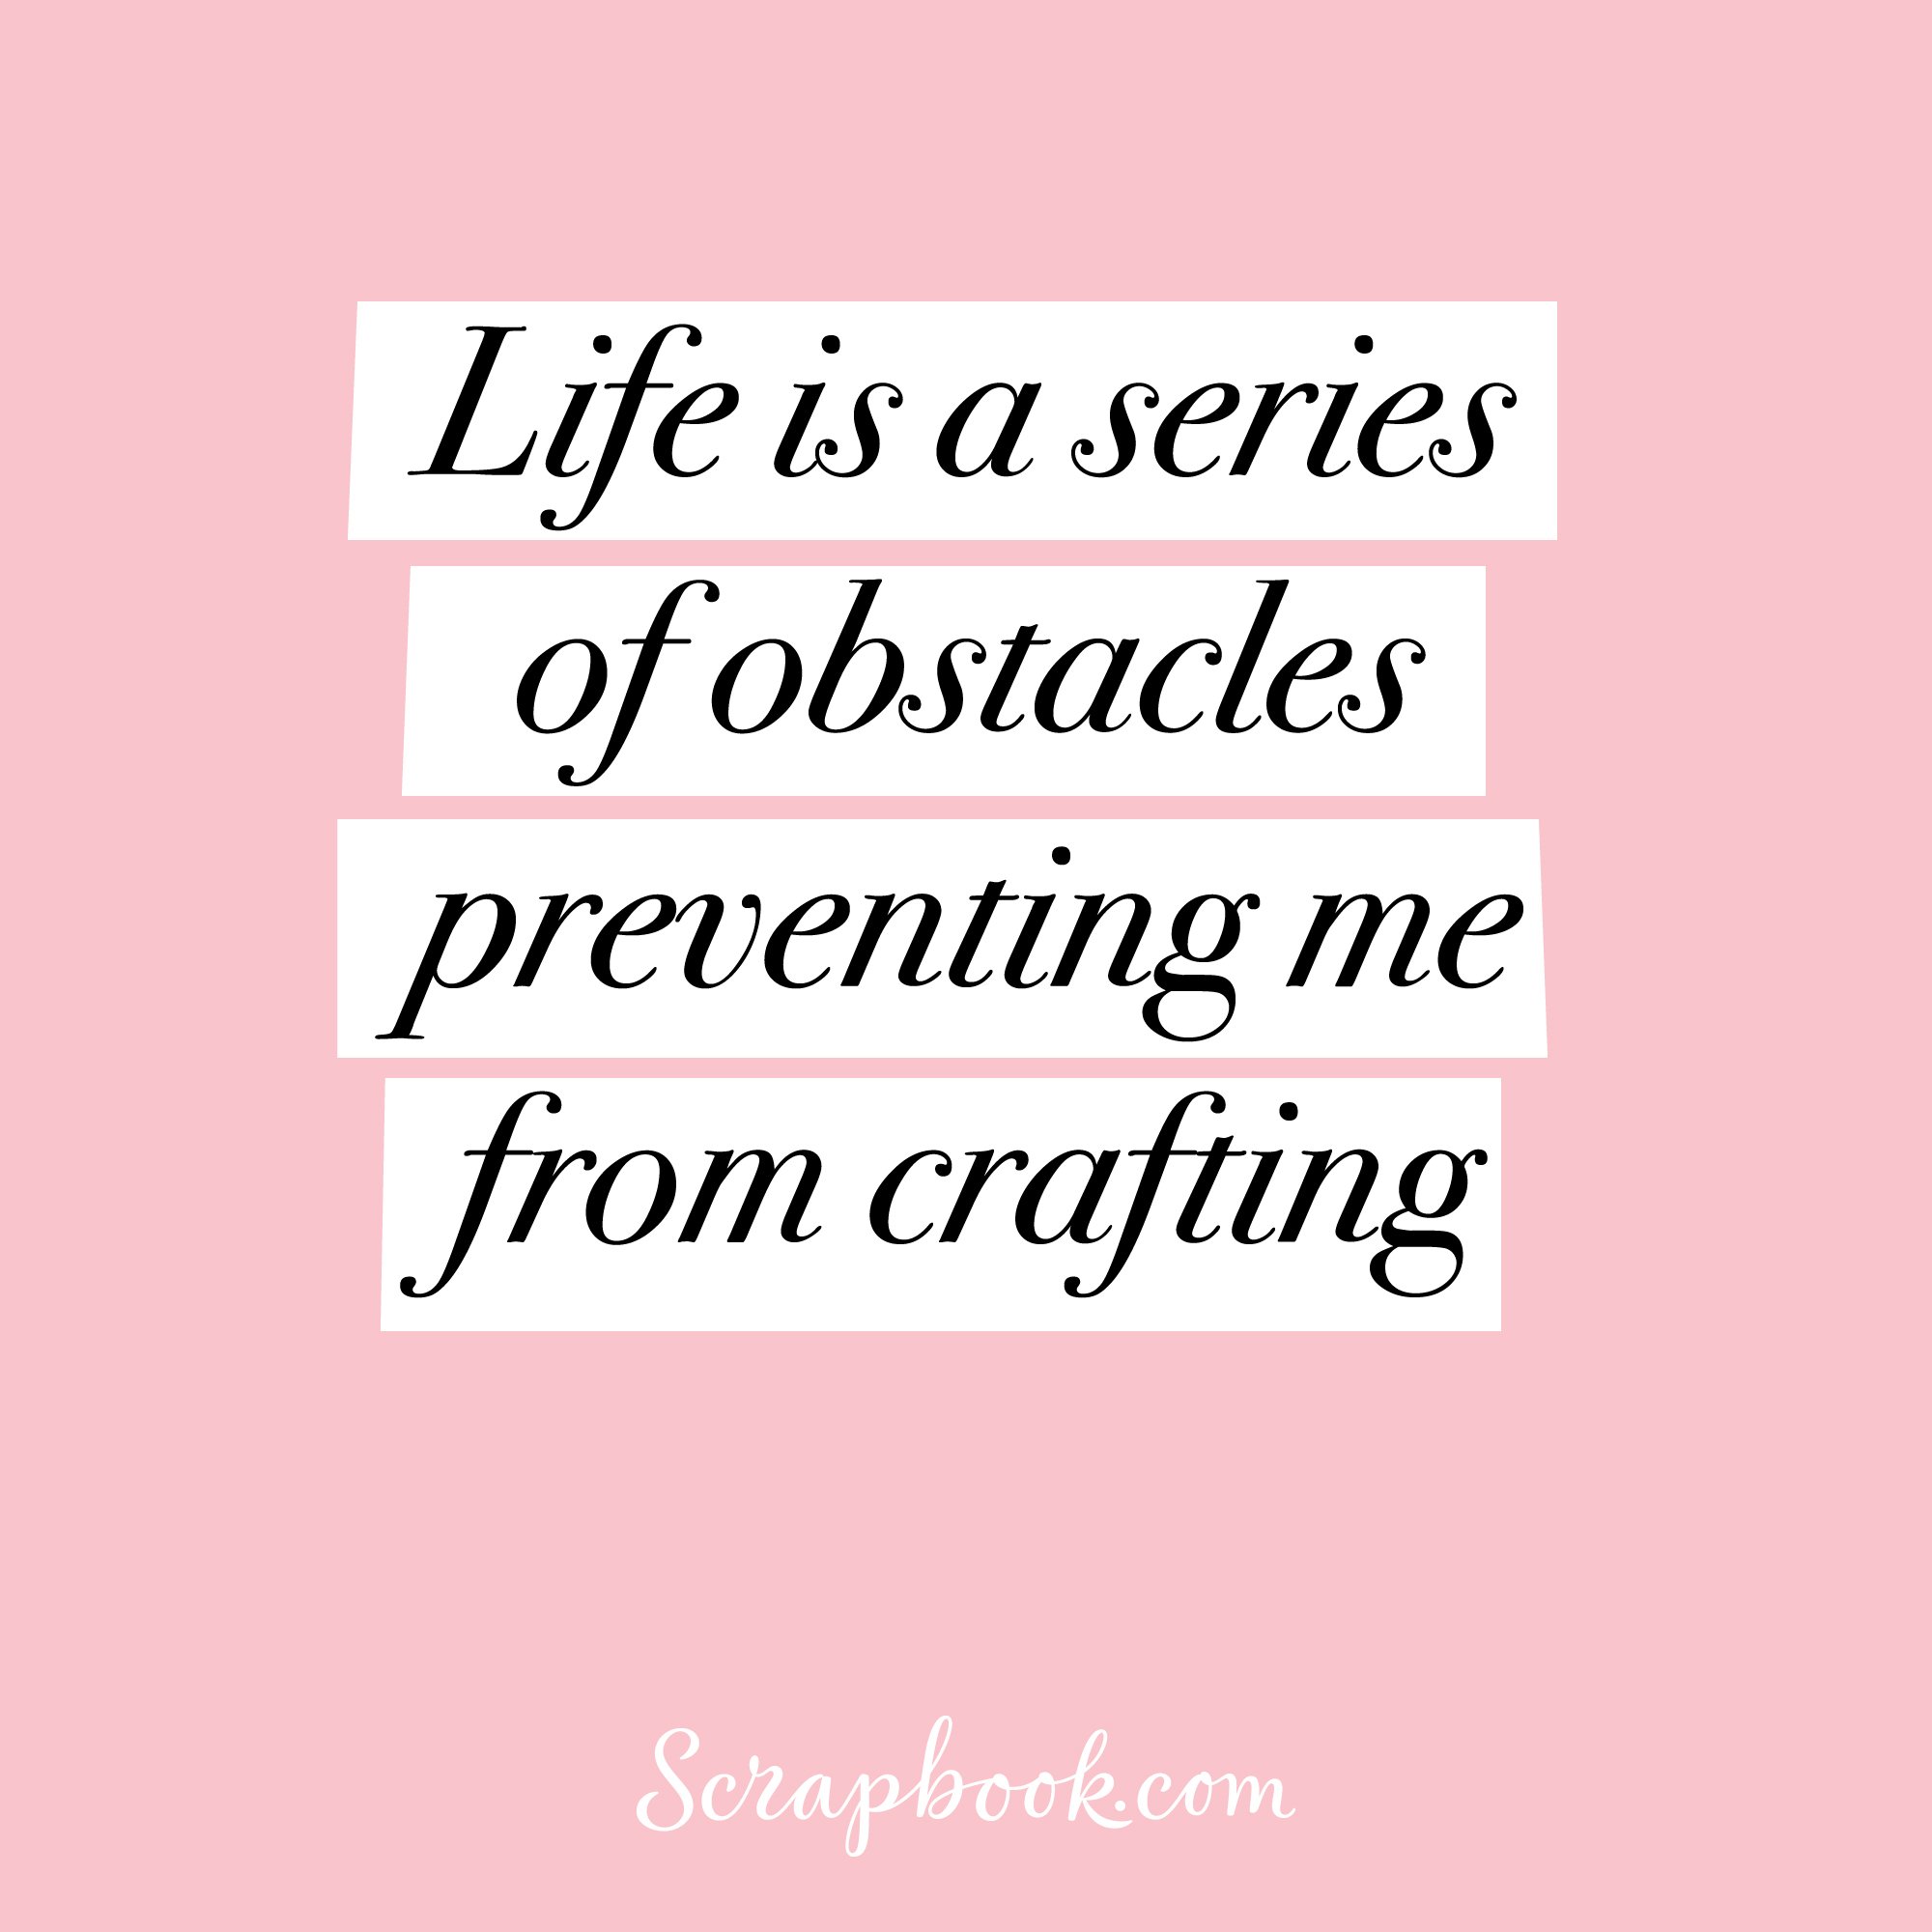 Life is a series of obstacles preventing me from crafting